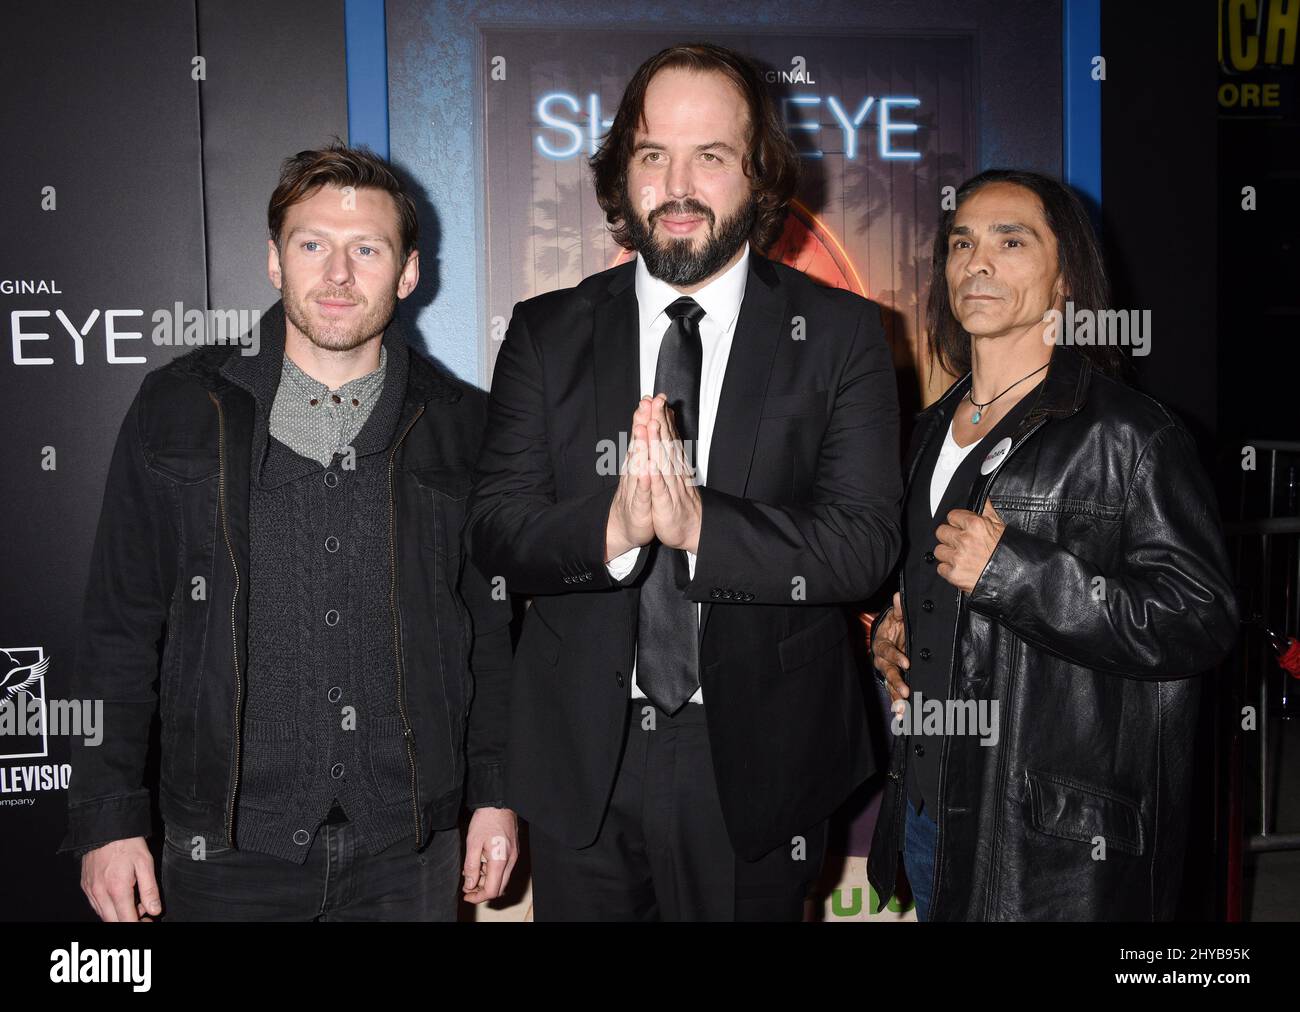 Keir O'Donnell, Angus Sampson and Zahn McClarnon attending the Hulu Original Series 'Shut Eye' Premiere held at the ArcLight Cinemas Hollywood Stock Photo